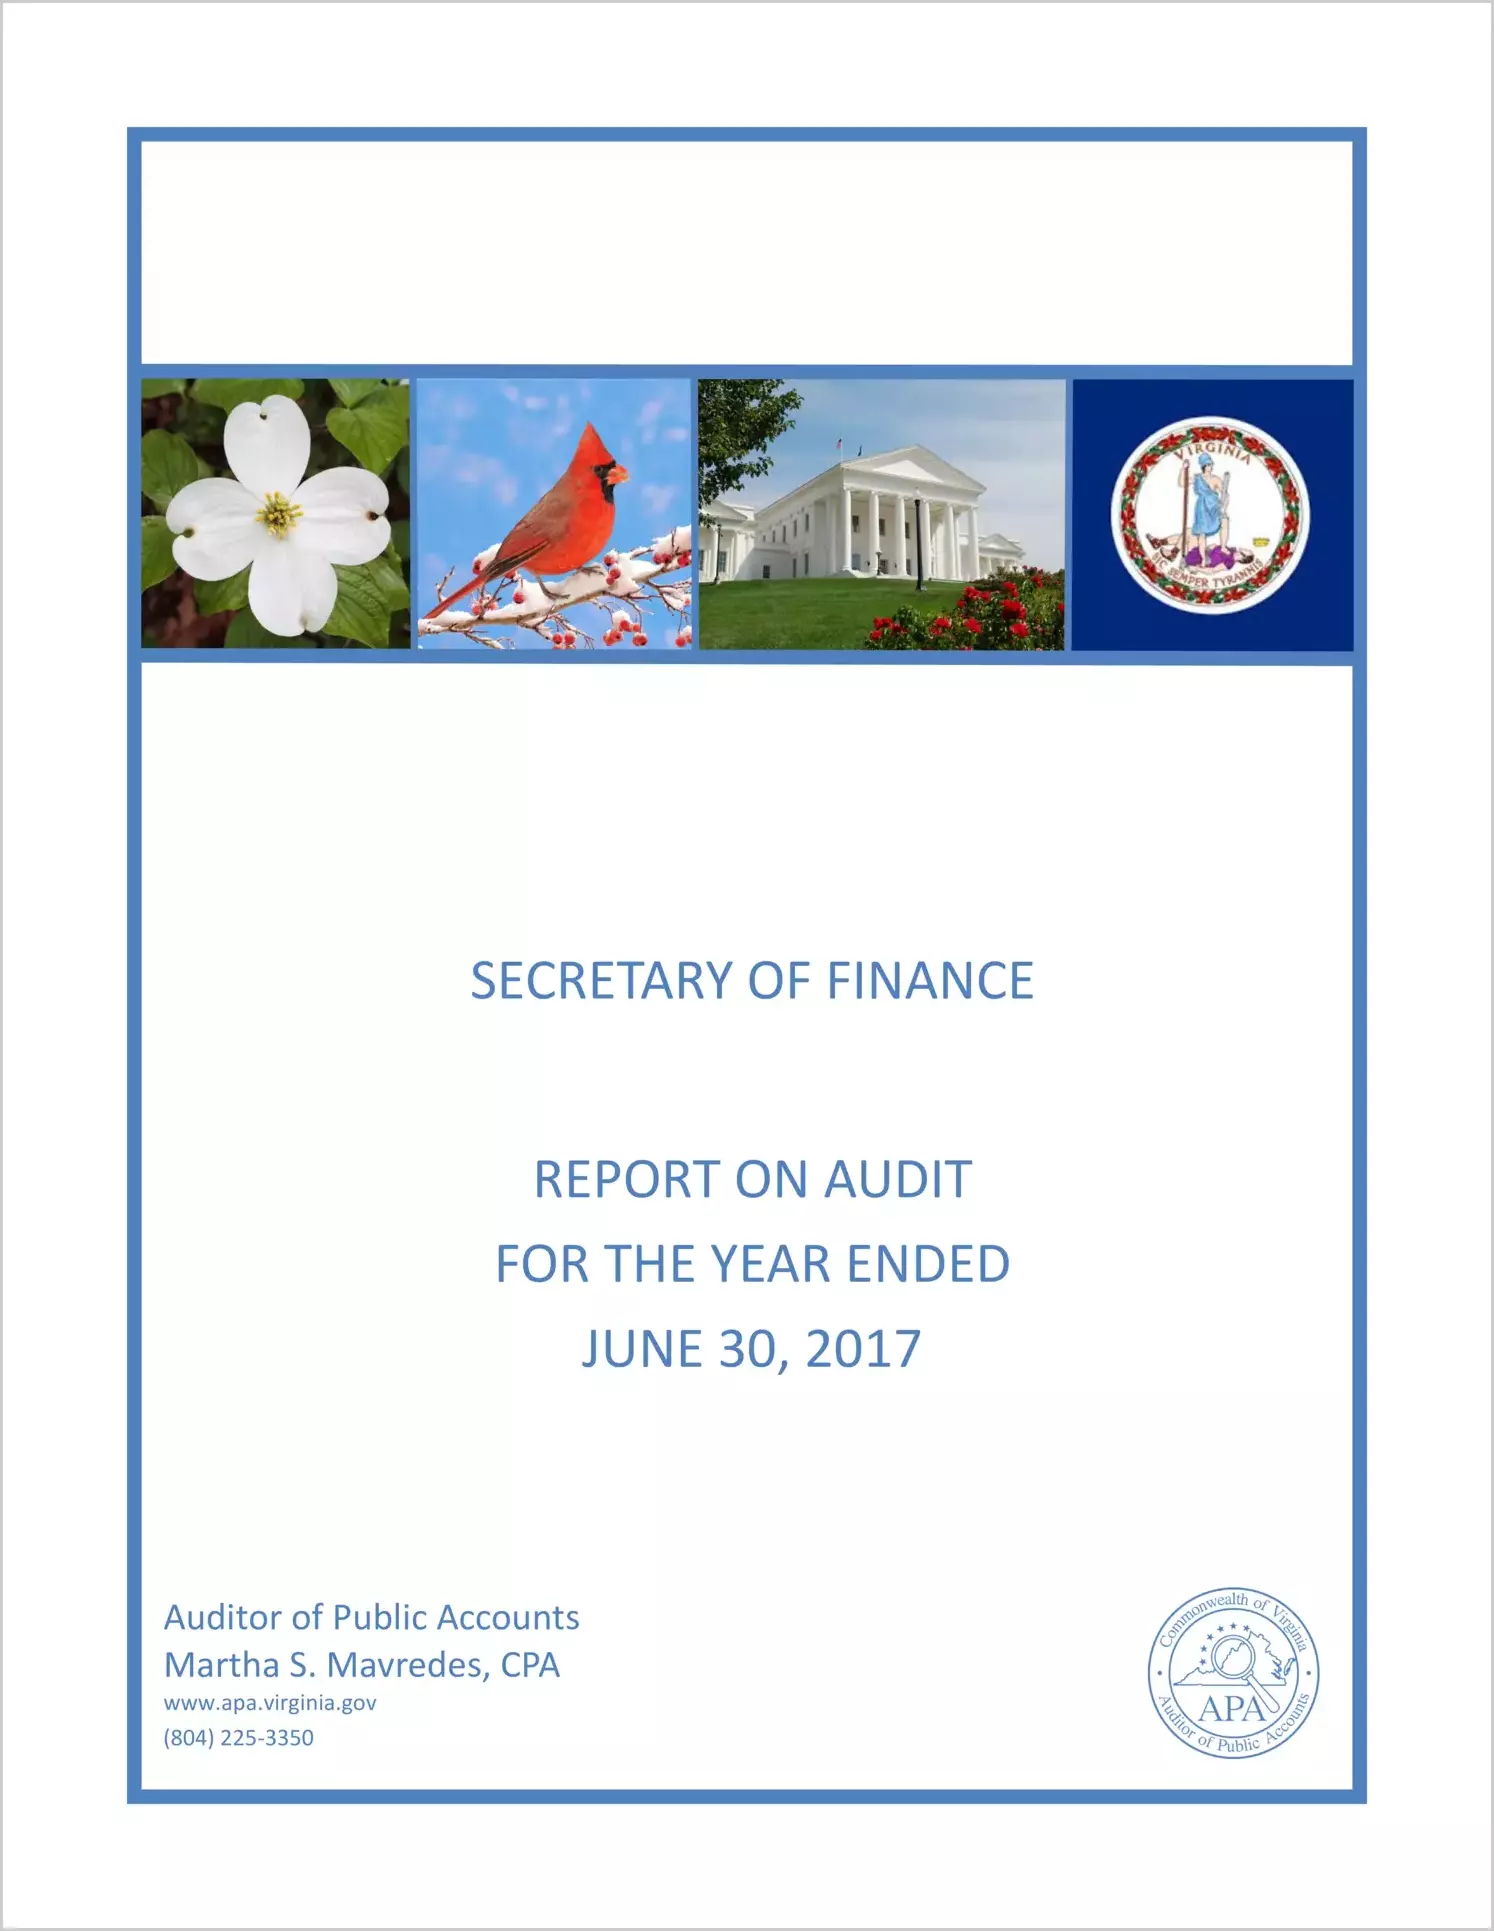 Secretary of Finance for the year ended June 30, 2017